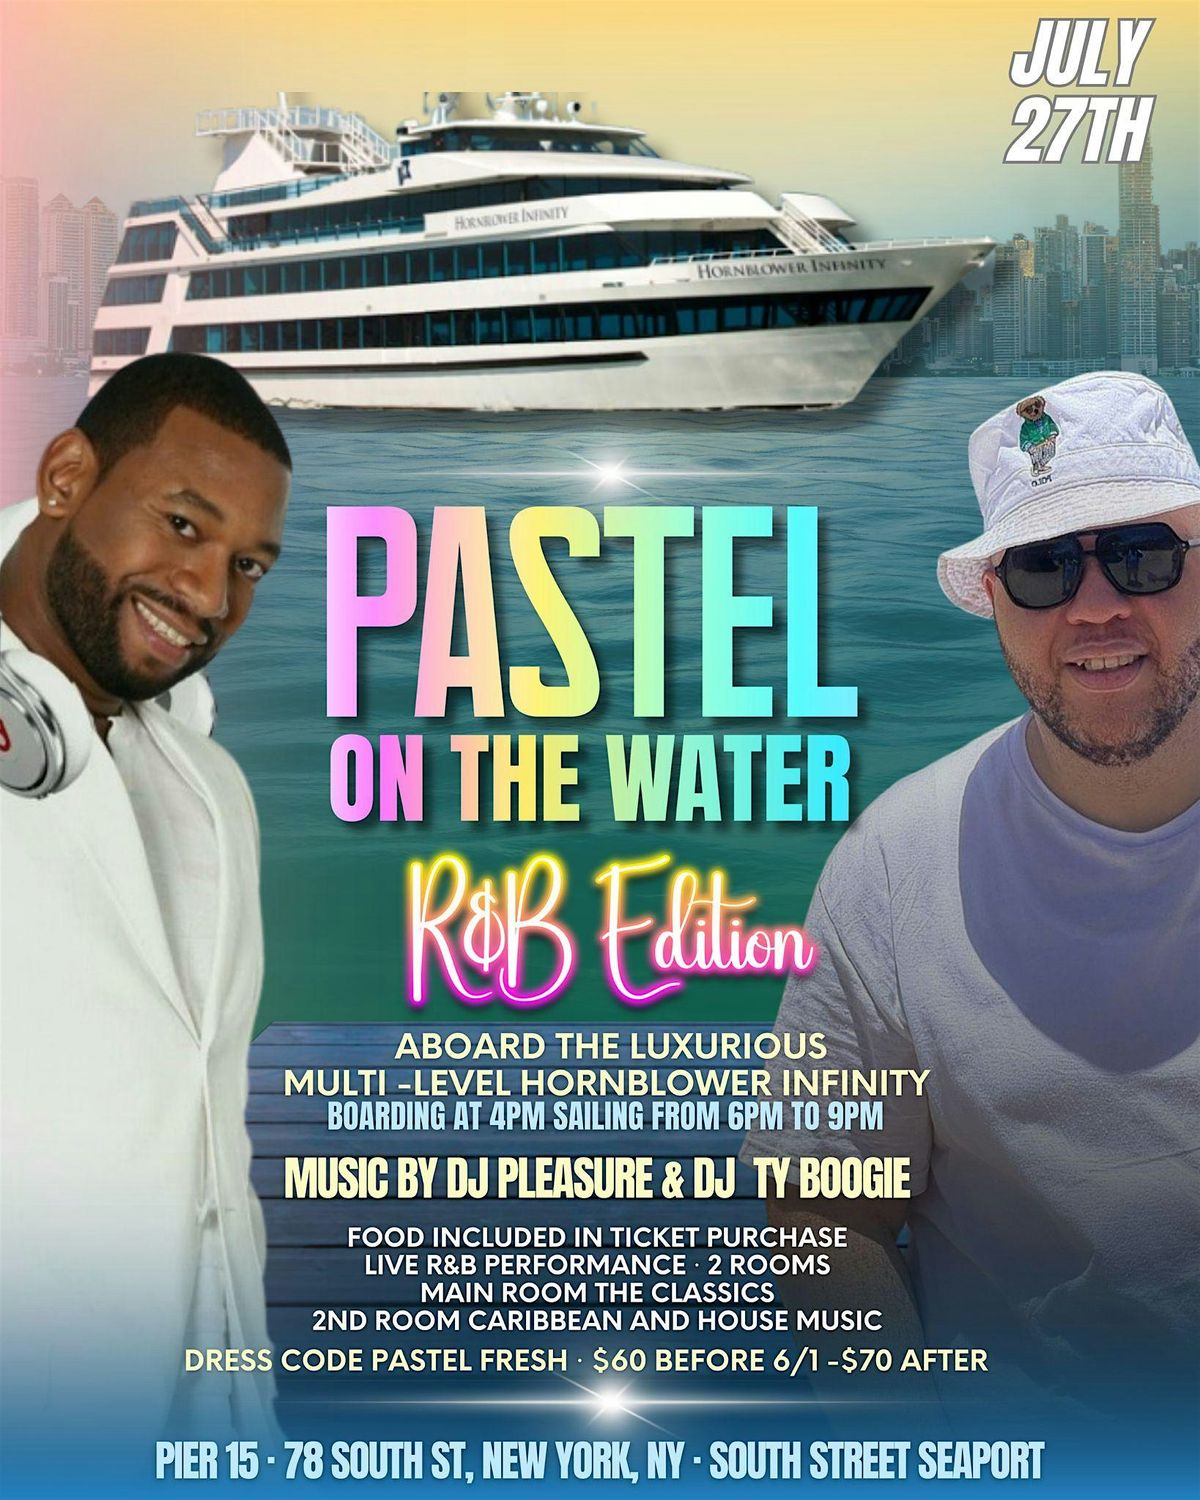 Saturday July 27th @ Pier 15 - Pastel On The Water - HORNBLOWER INFINITY